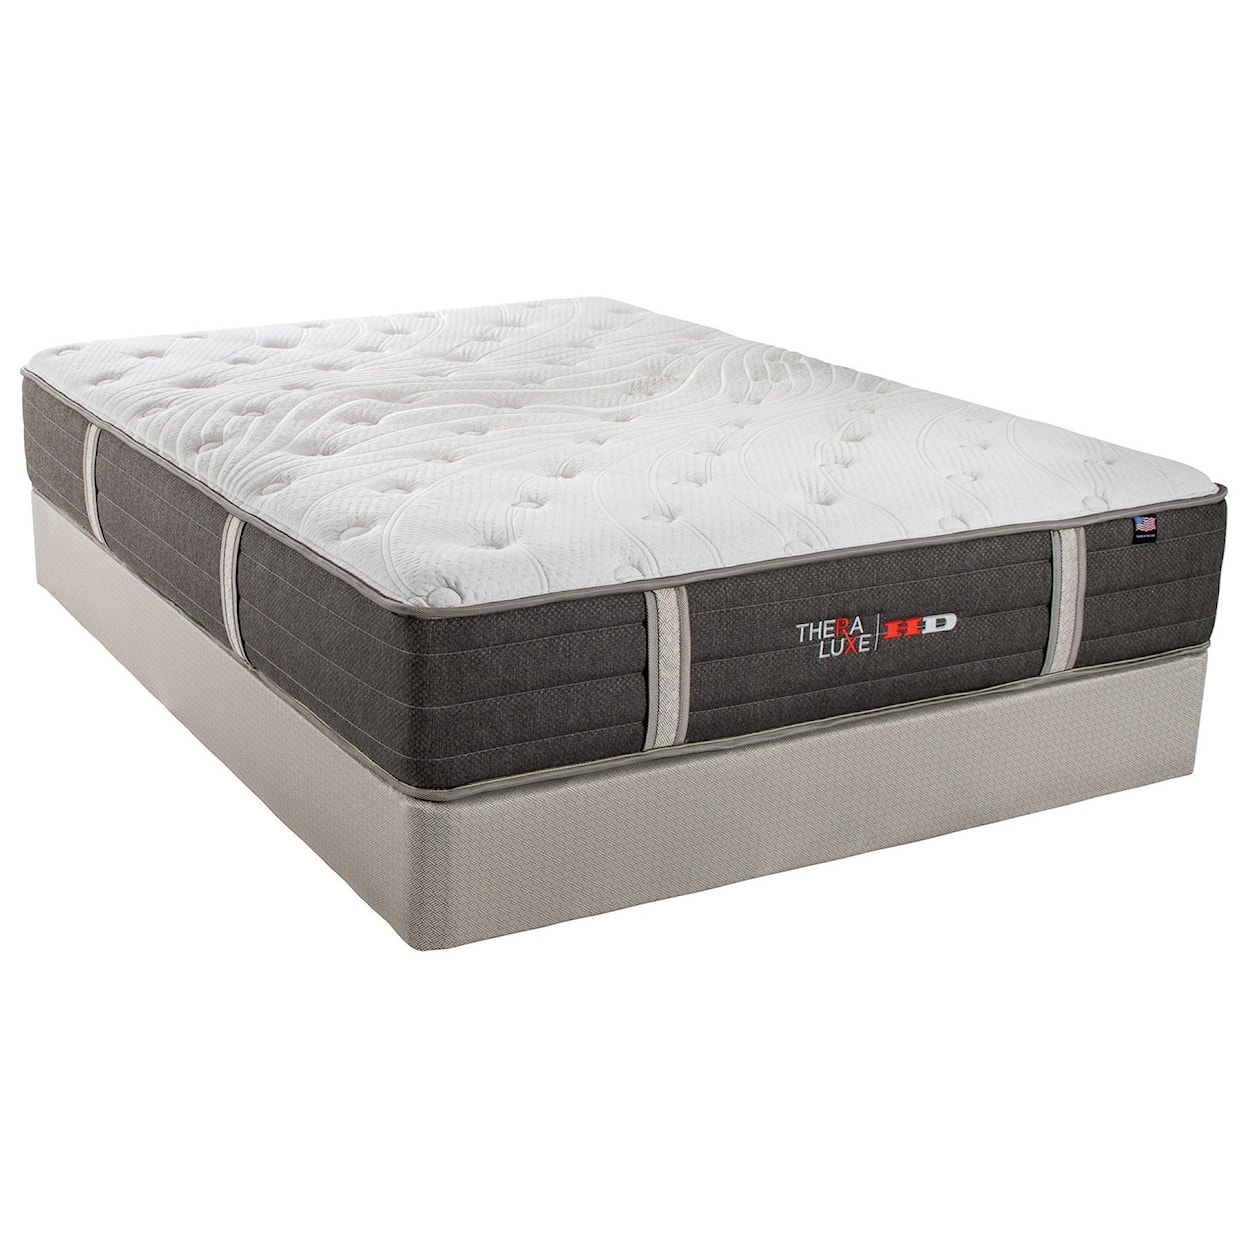 Therapedic Theraluxe Aspen King Firm Pocketed Coil Mattress Set